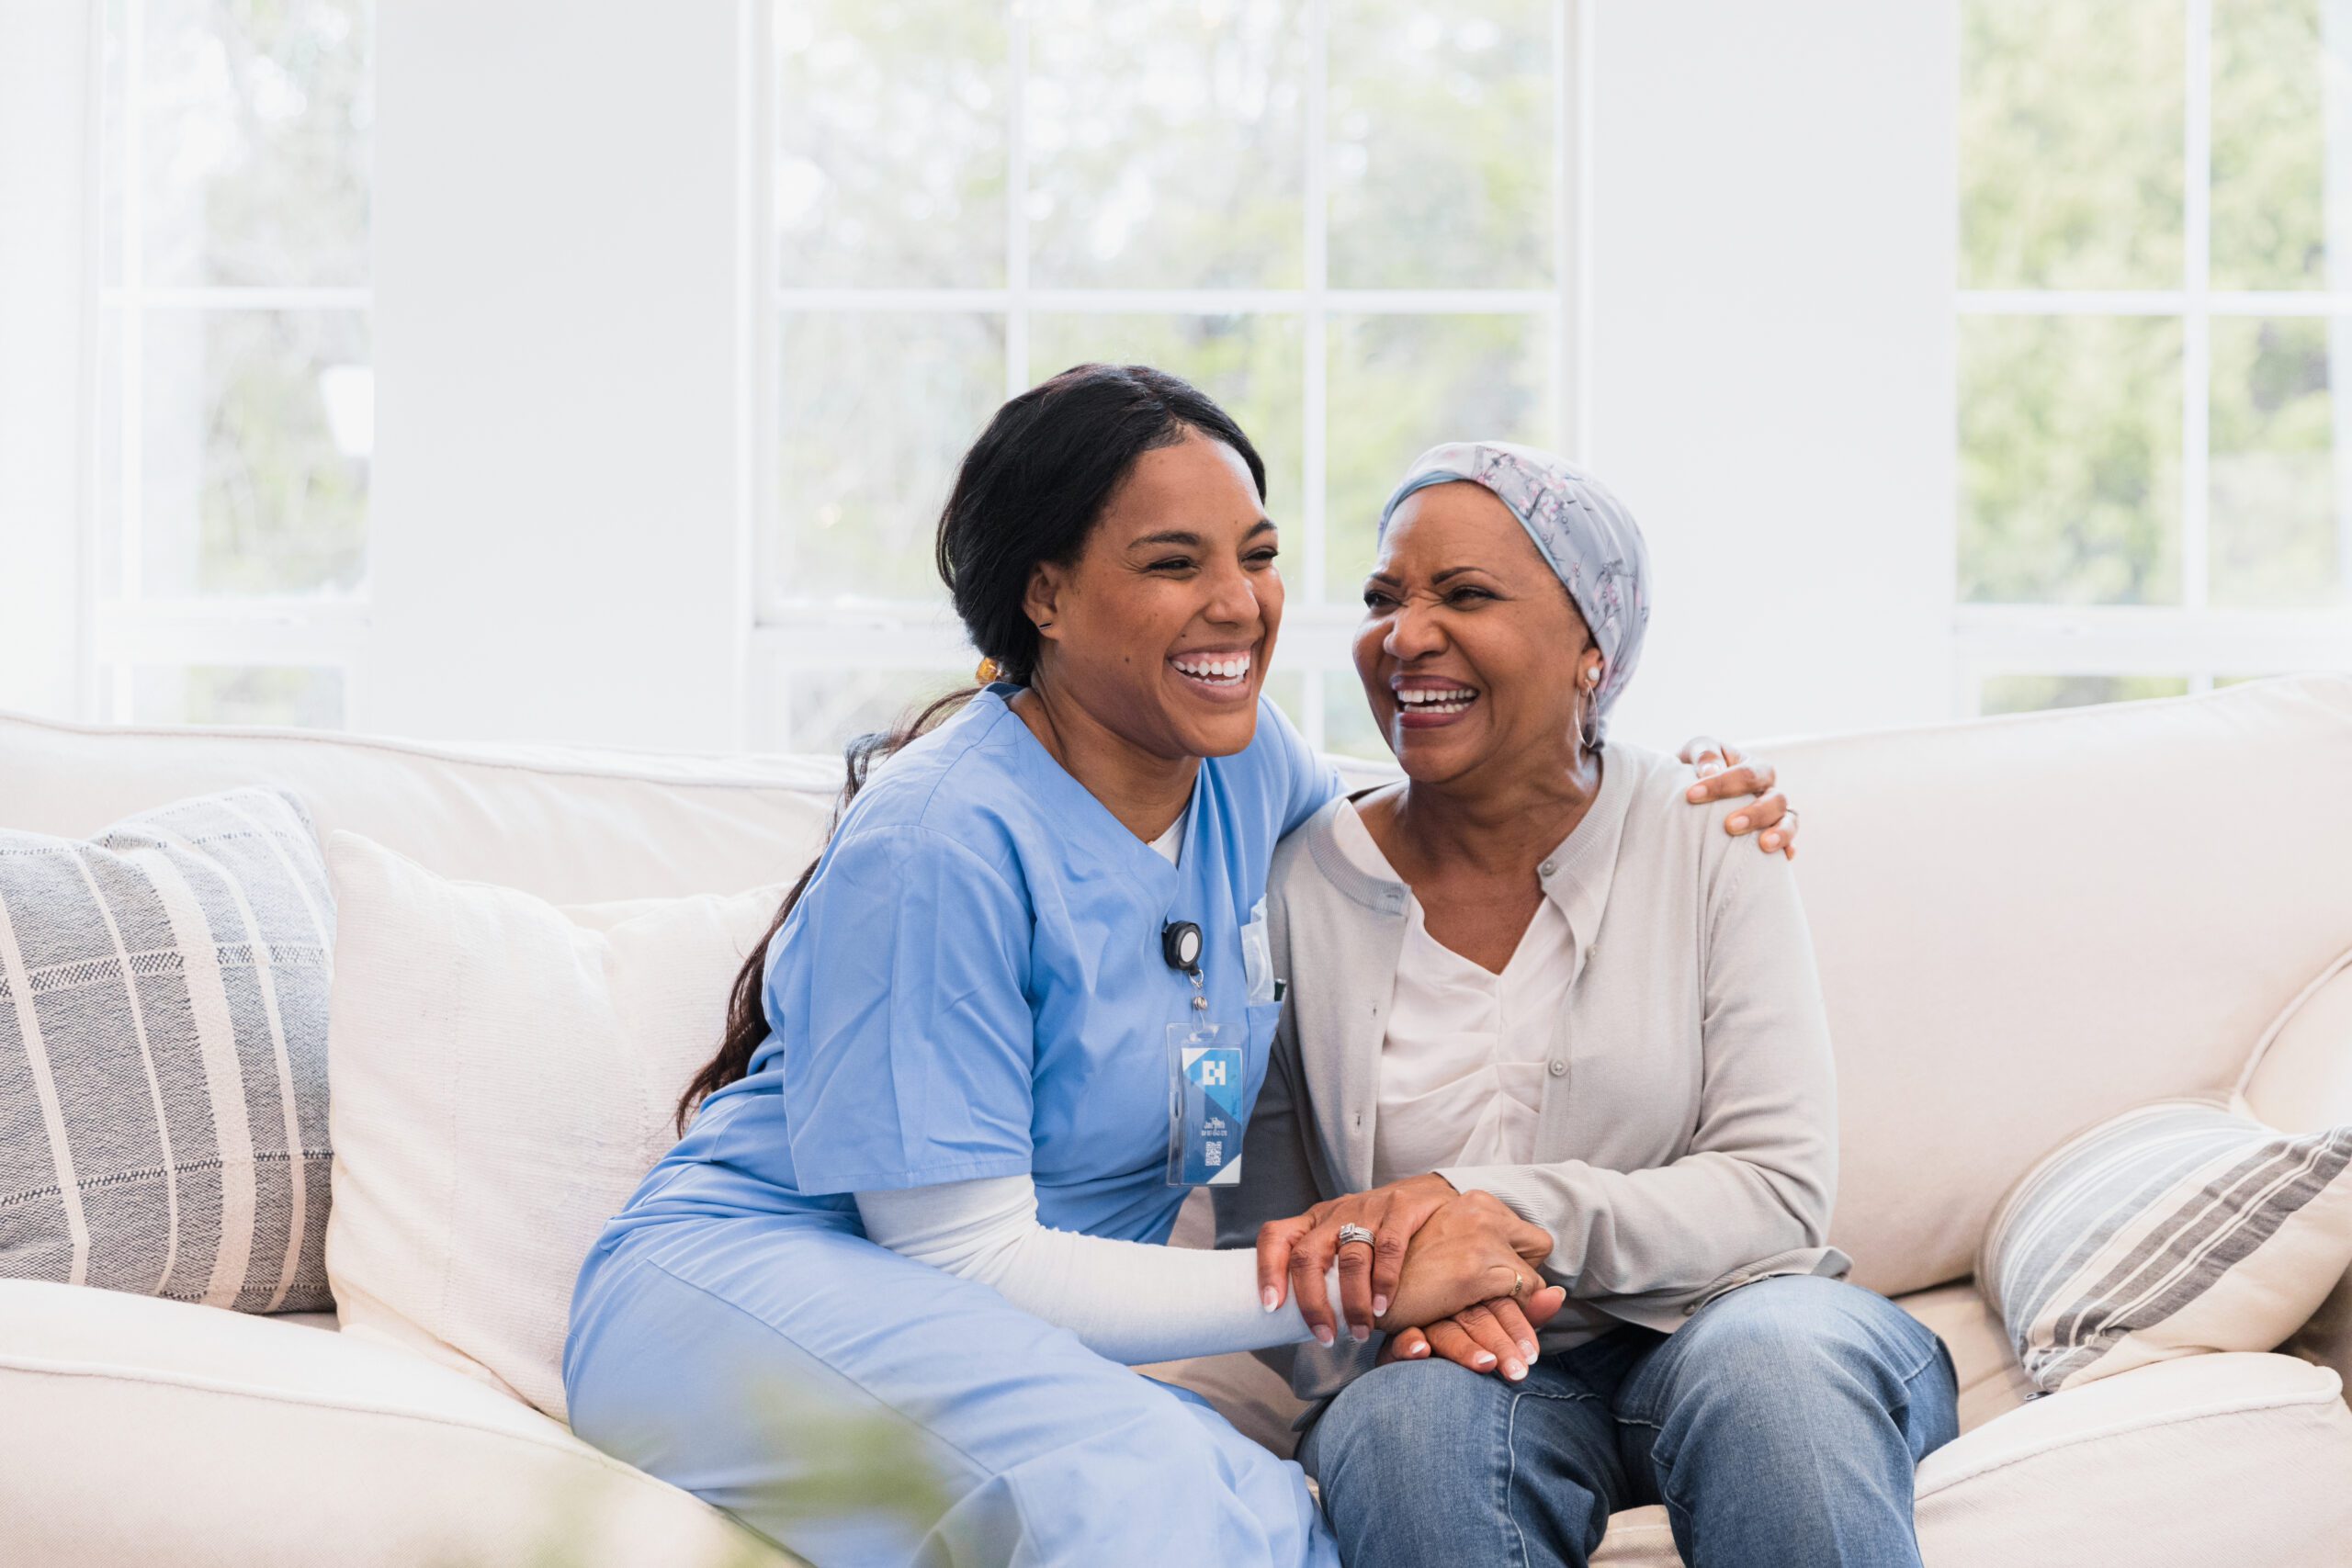 During her visit, the mid adult home health nurse and the senior adult woman with cancer embrace and laugh together. |